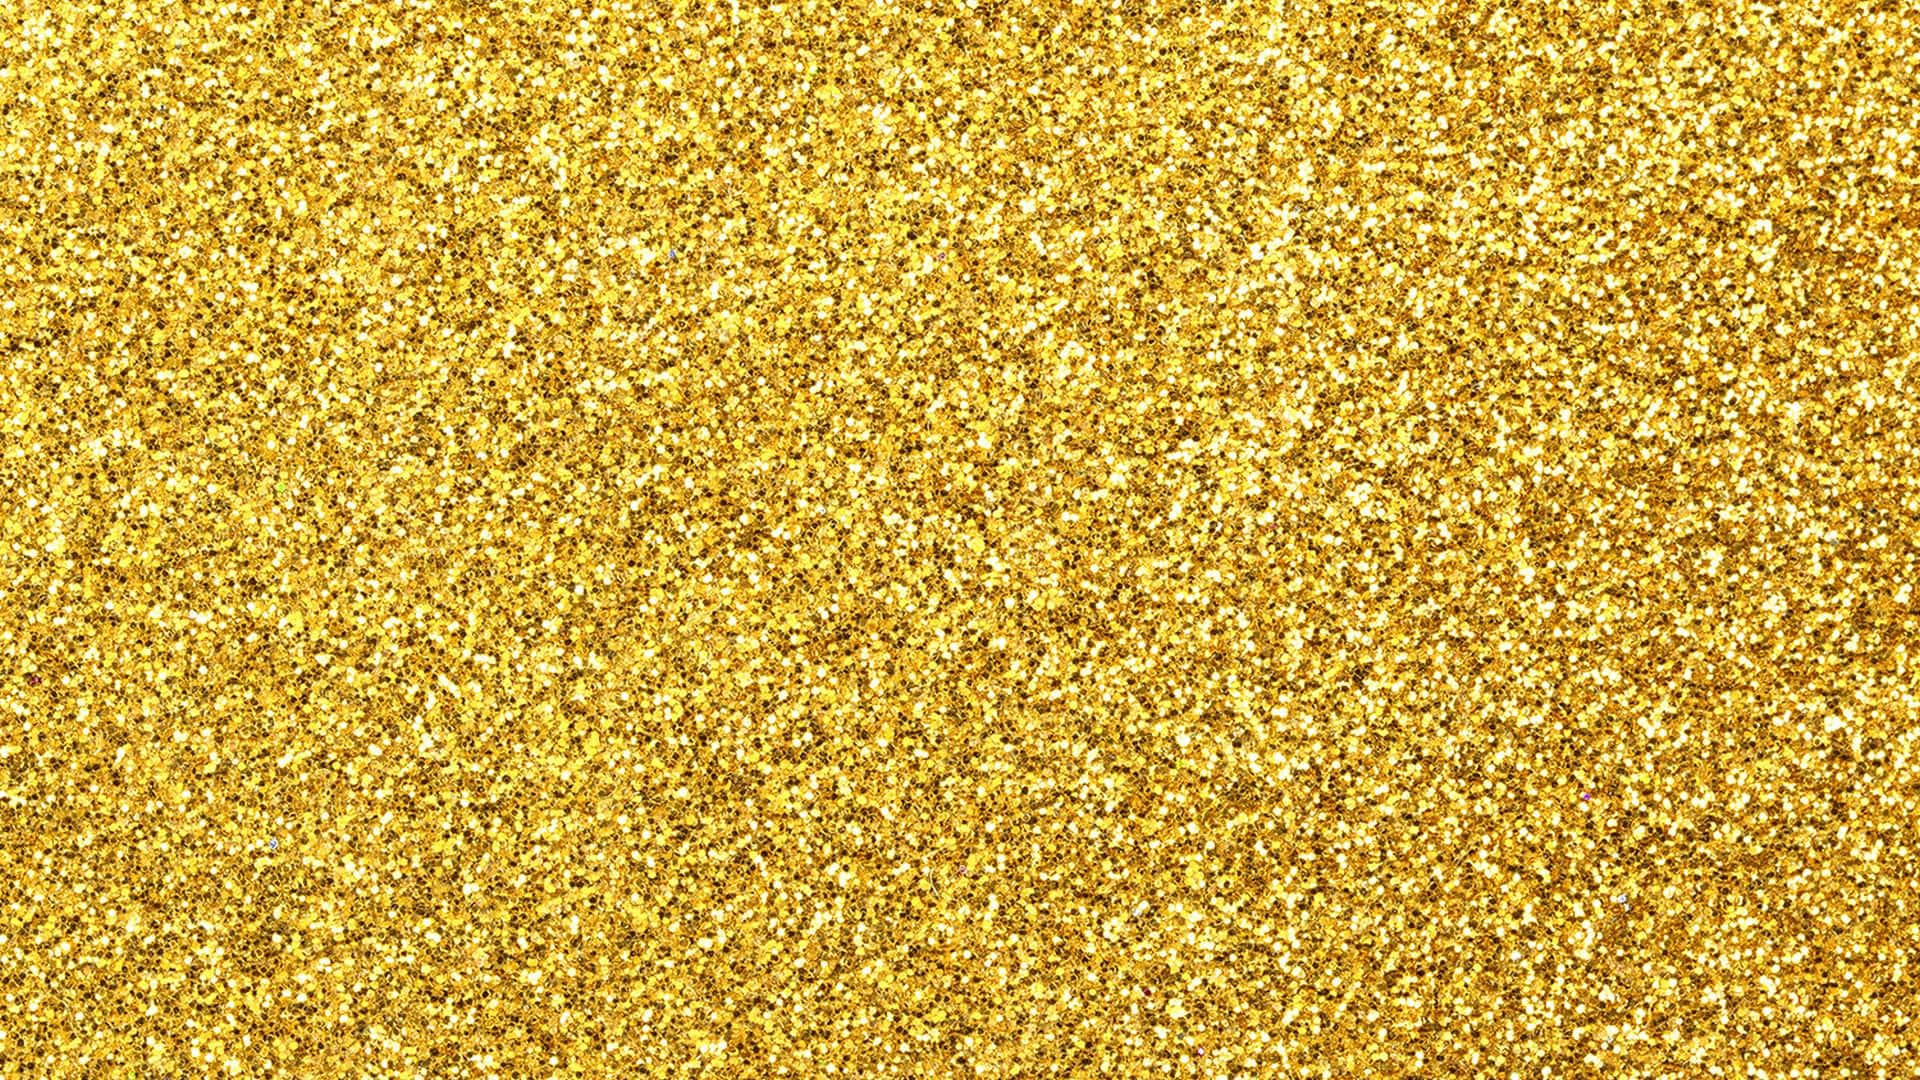 A dazzling golden glitter background perfect for any special occasion.